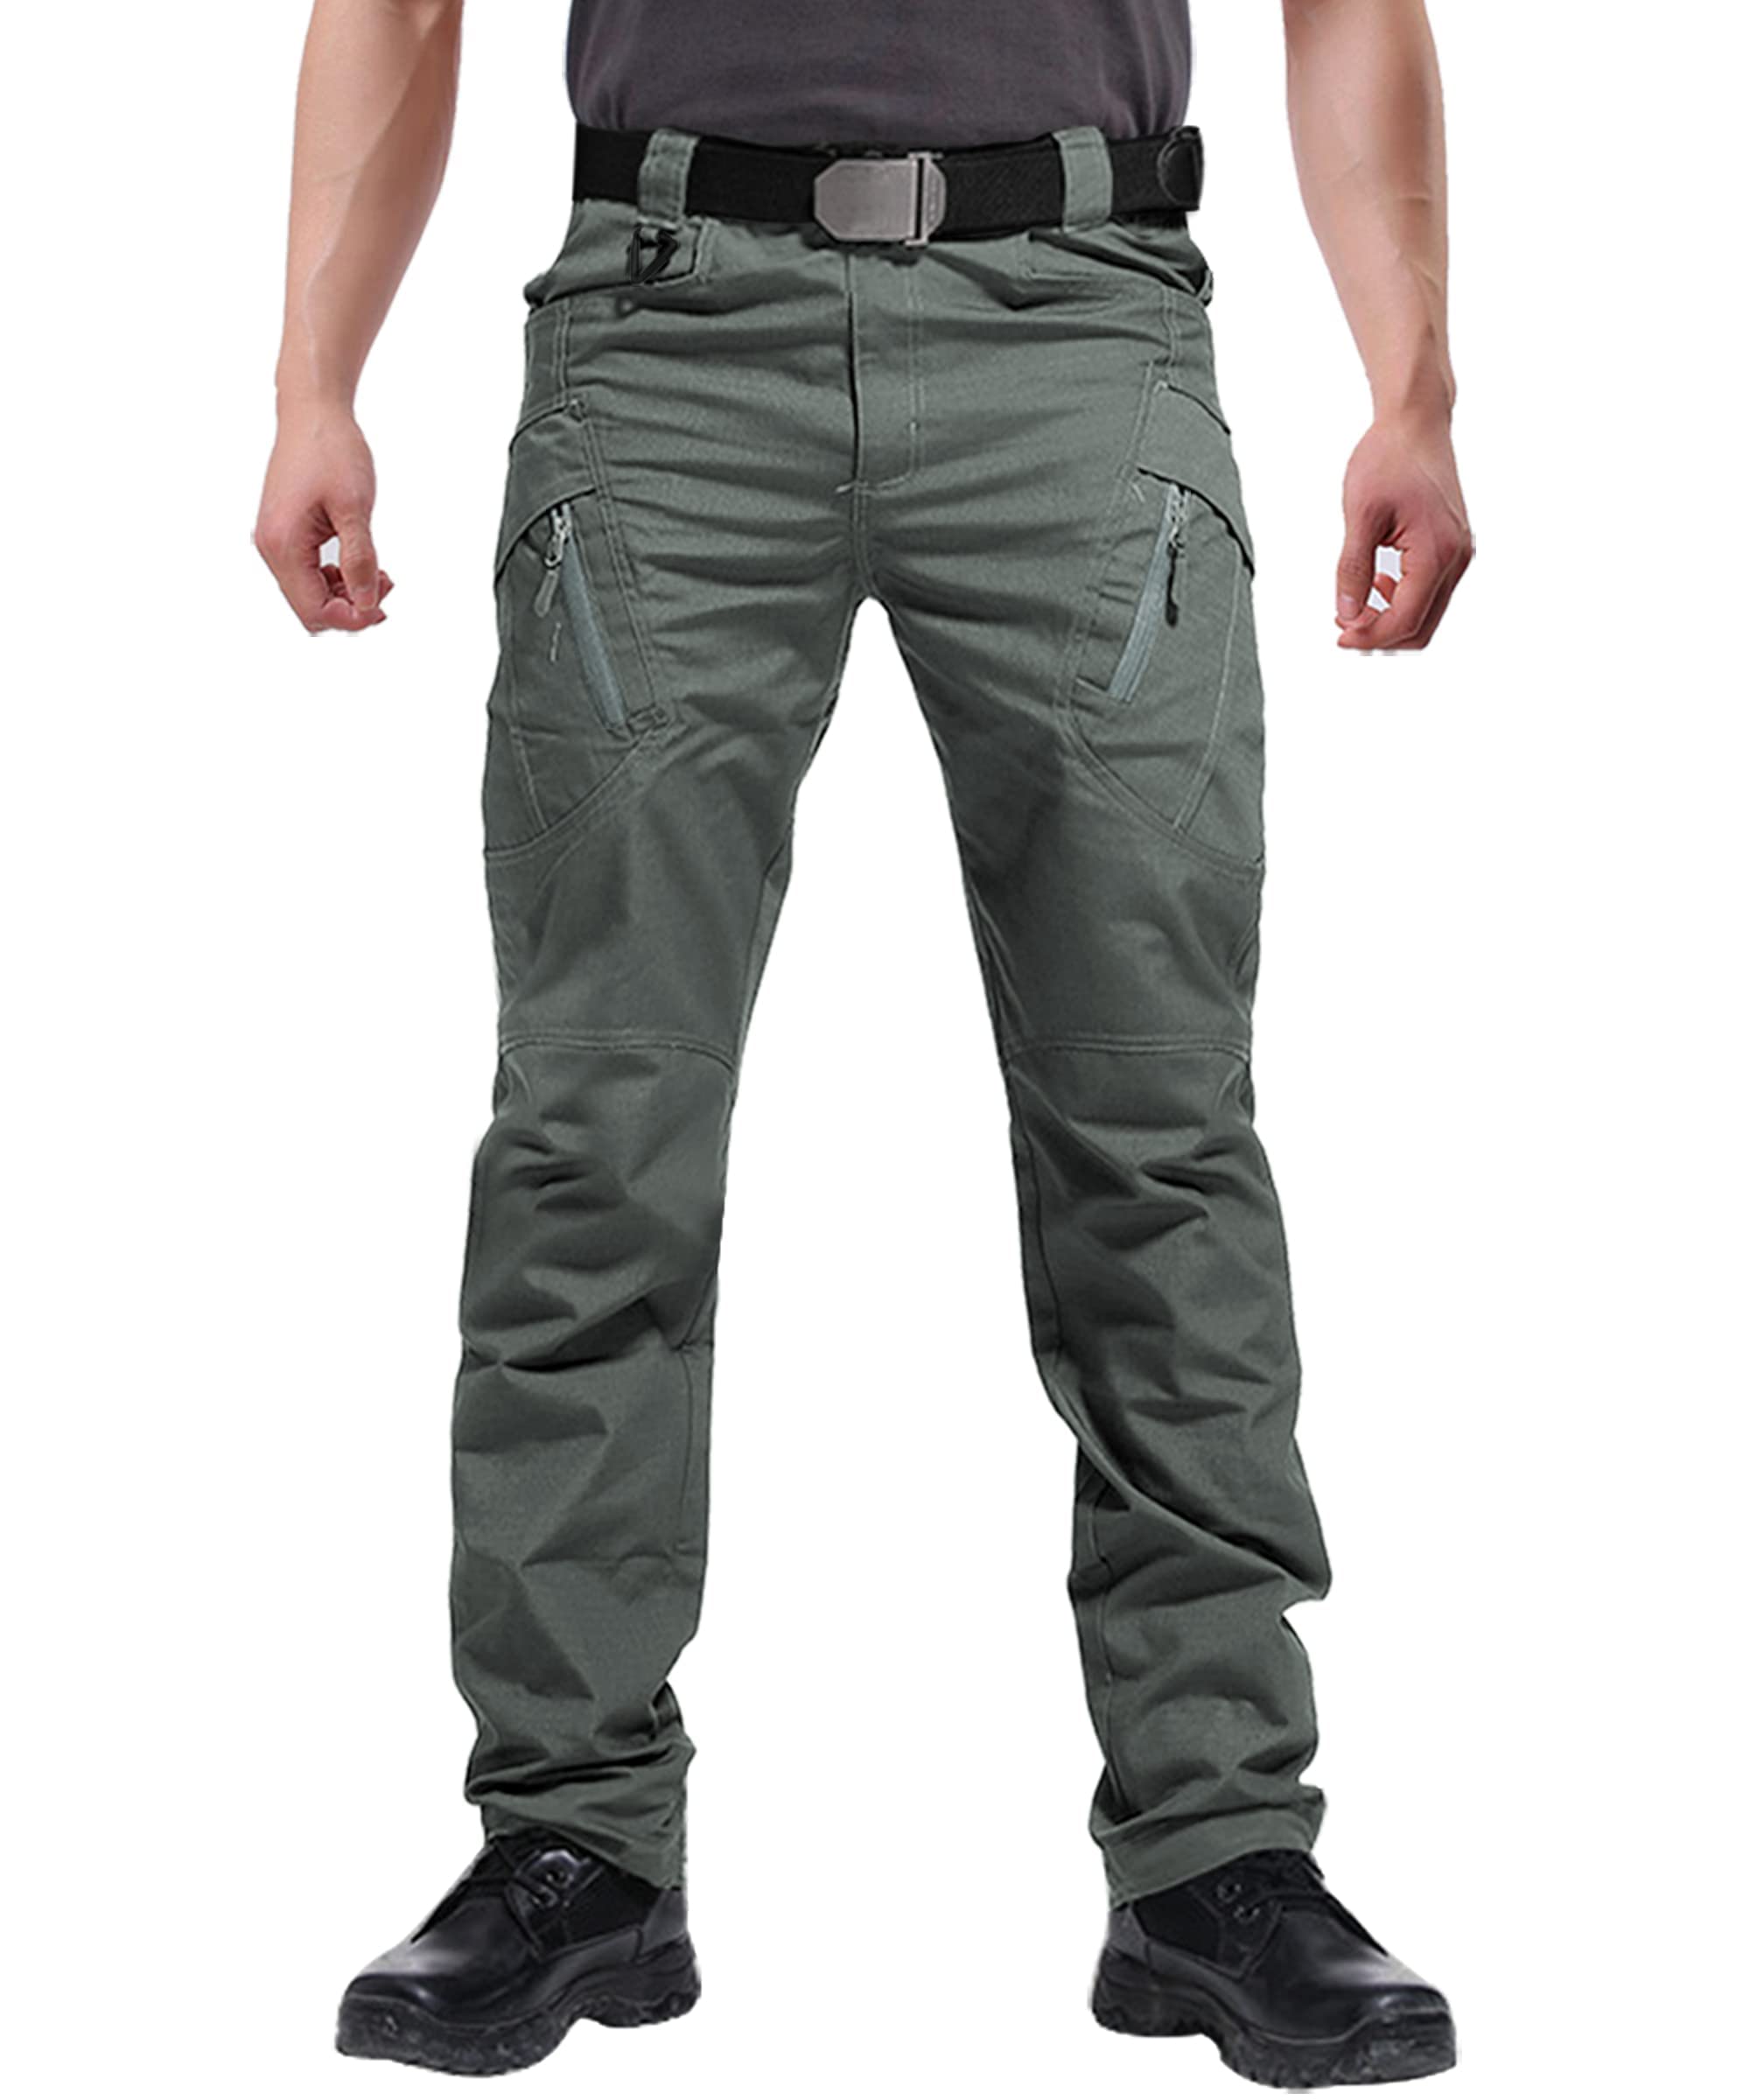  Men's Cargo Pants Relaxed Fit Cargo Work Pants Lightweight  Military Combat Tactical Pants with 8 Pockets（Belt not Included） Size 30  Black : Clothing, Shoes & Jewelry